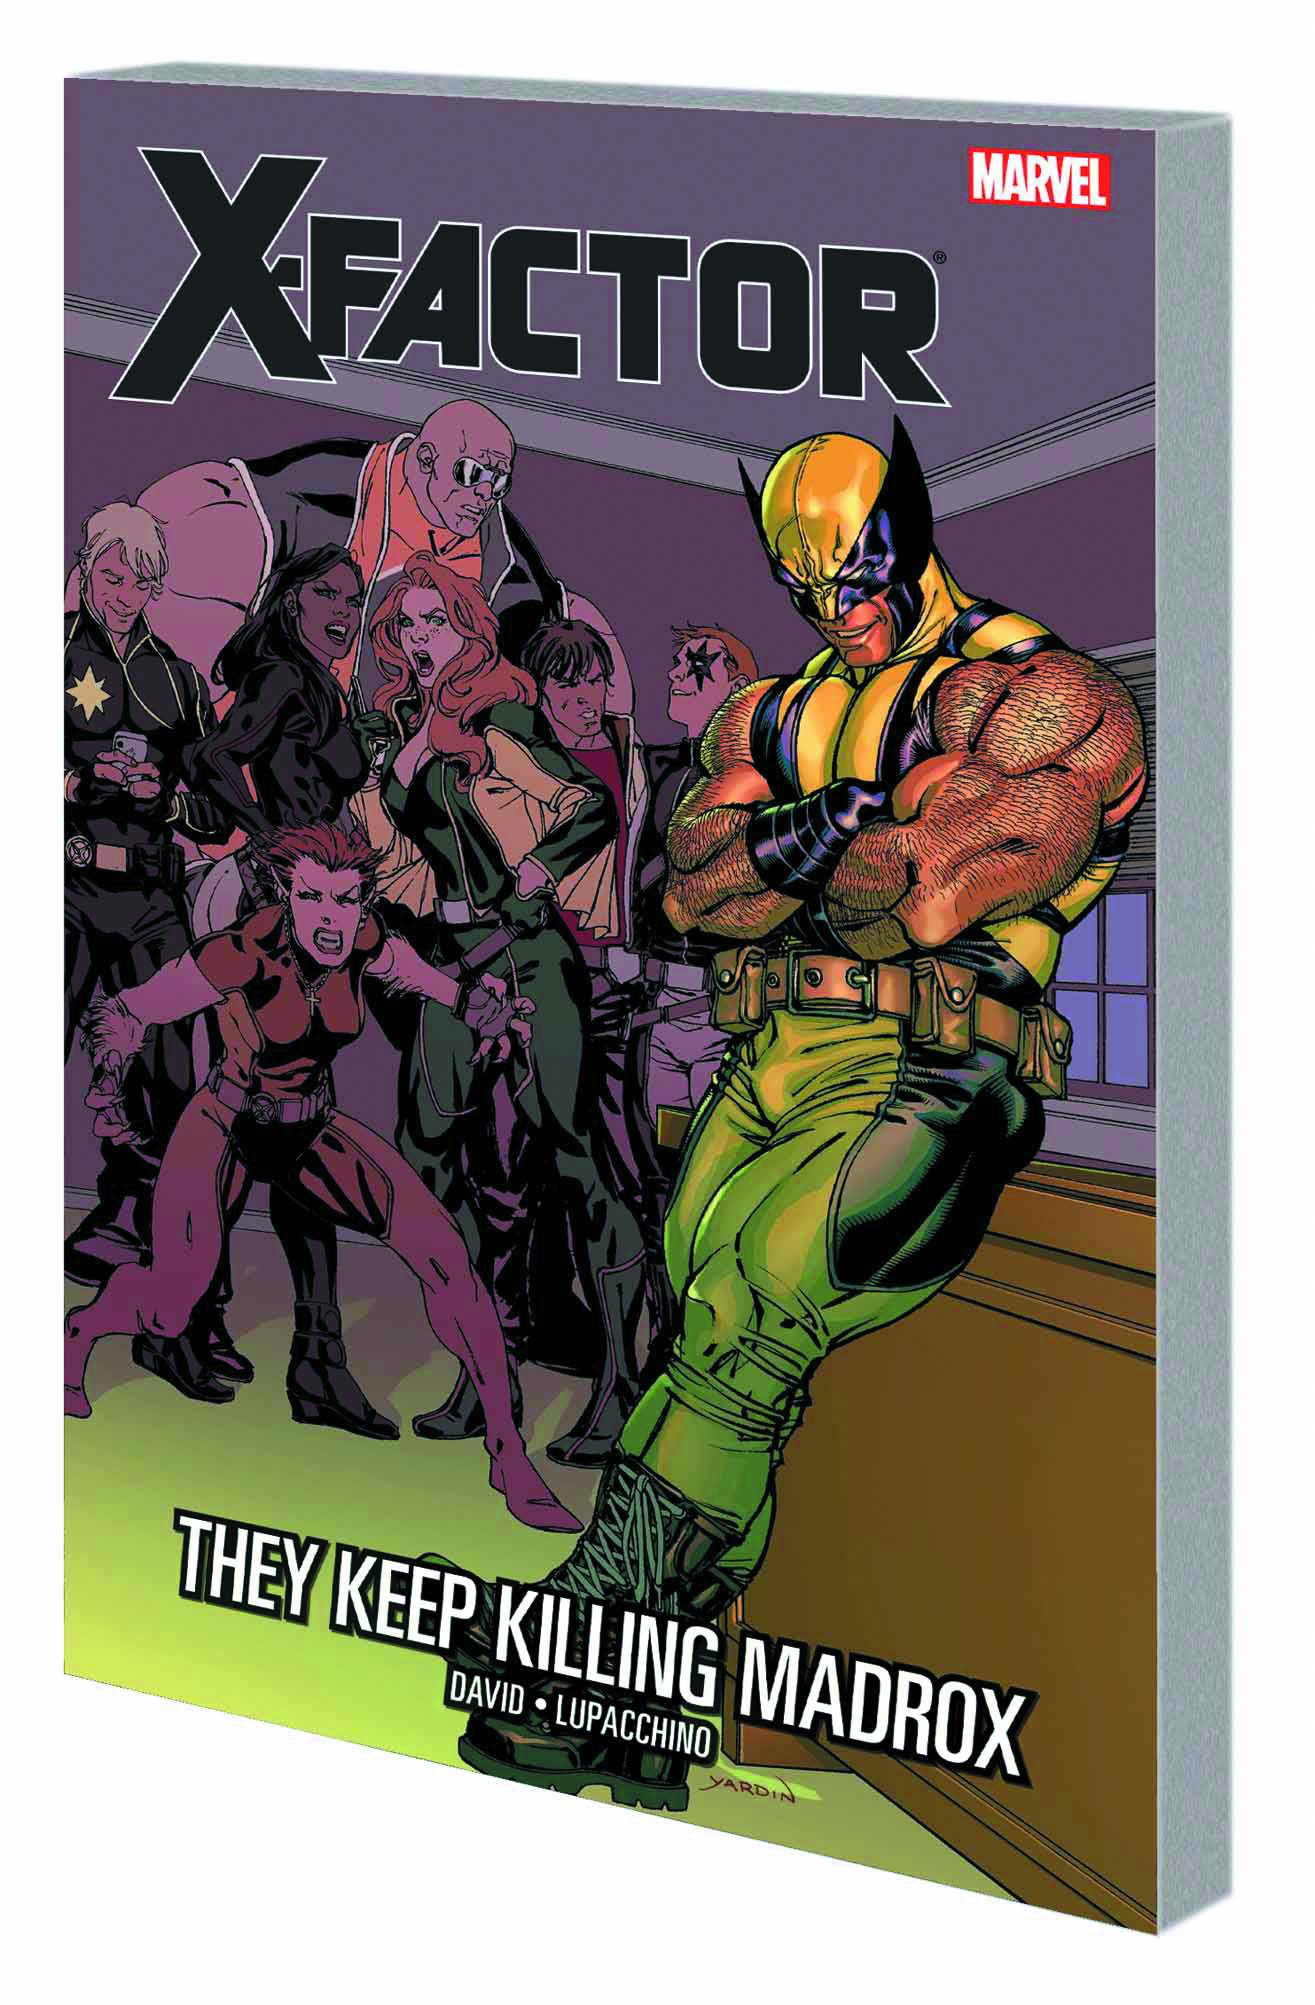 X-Factor Graphic Novel Volume 15 They Keep Killing Madrox